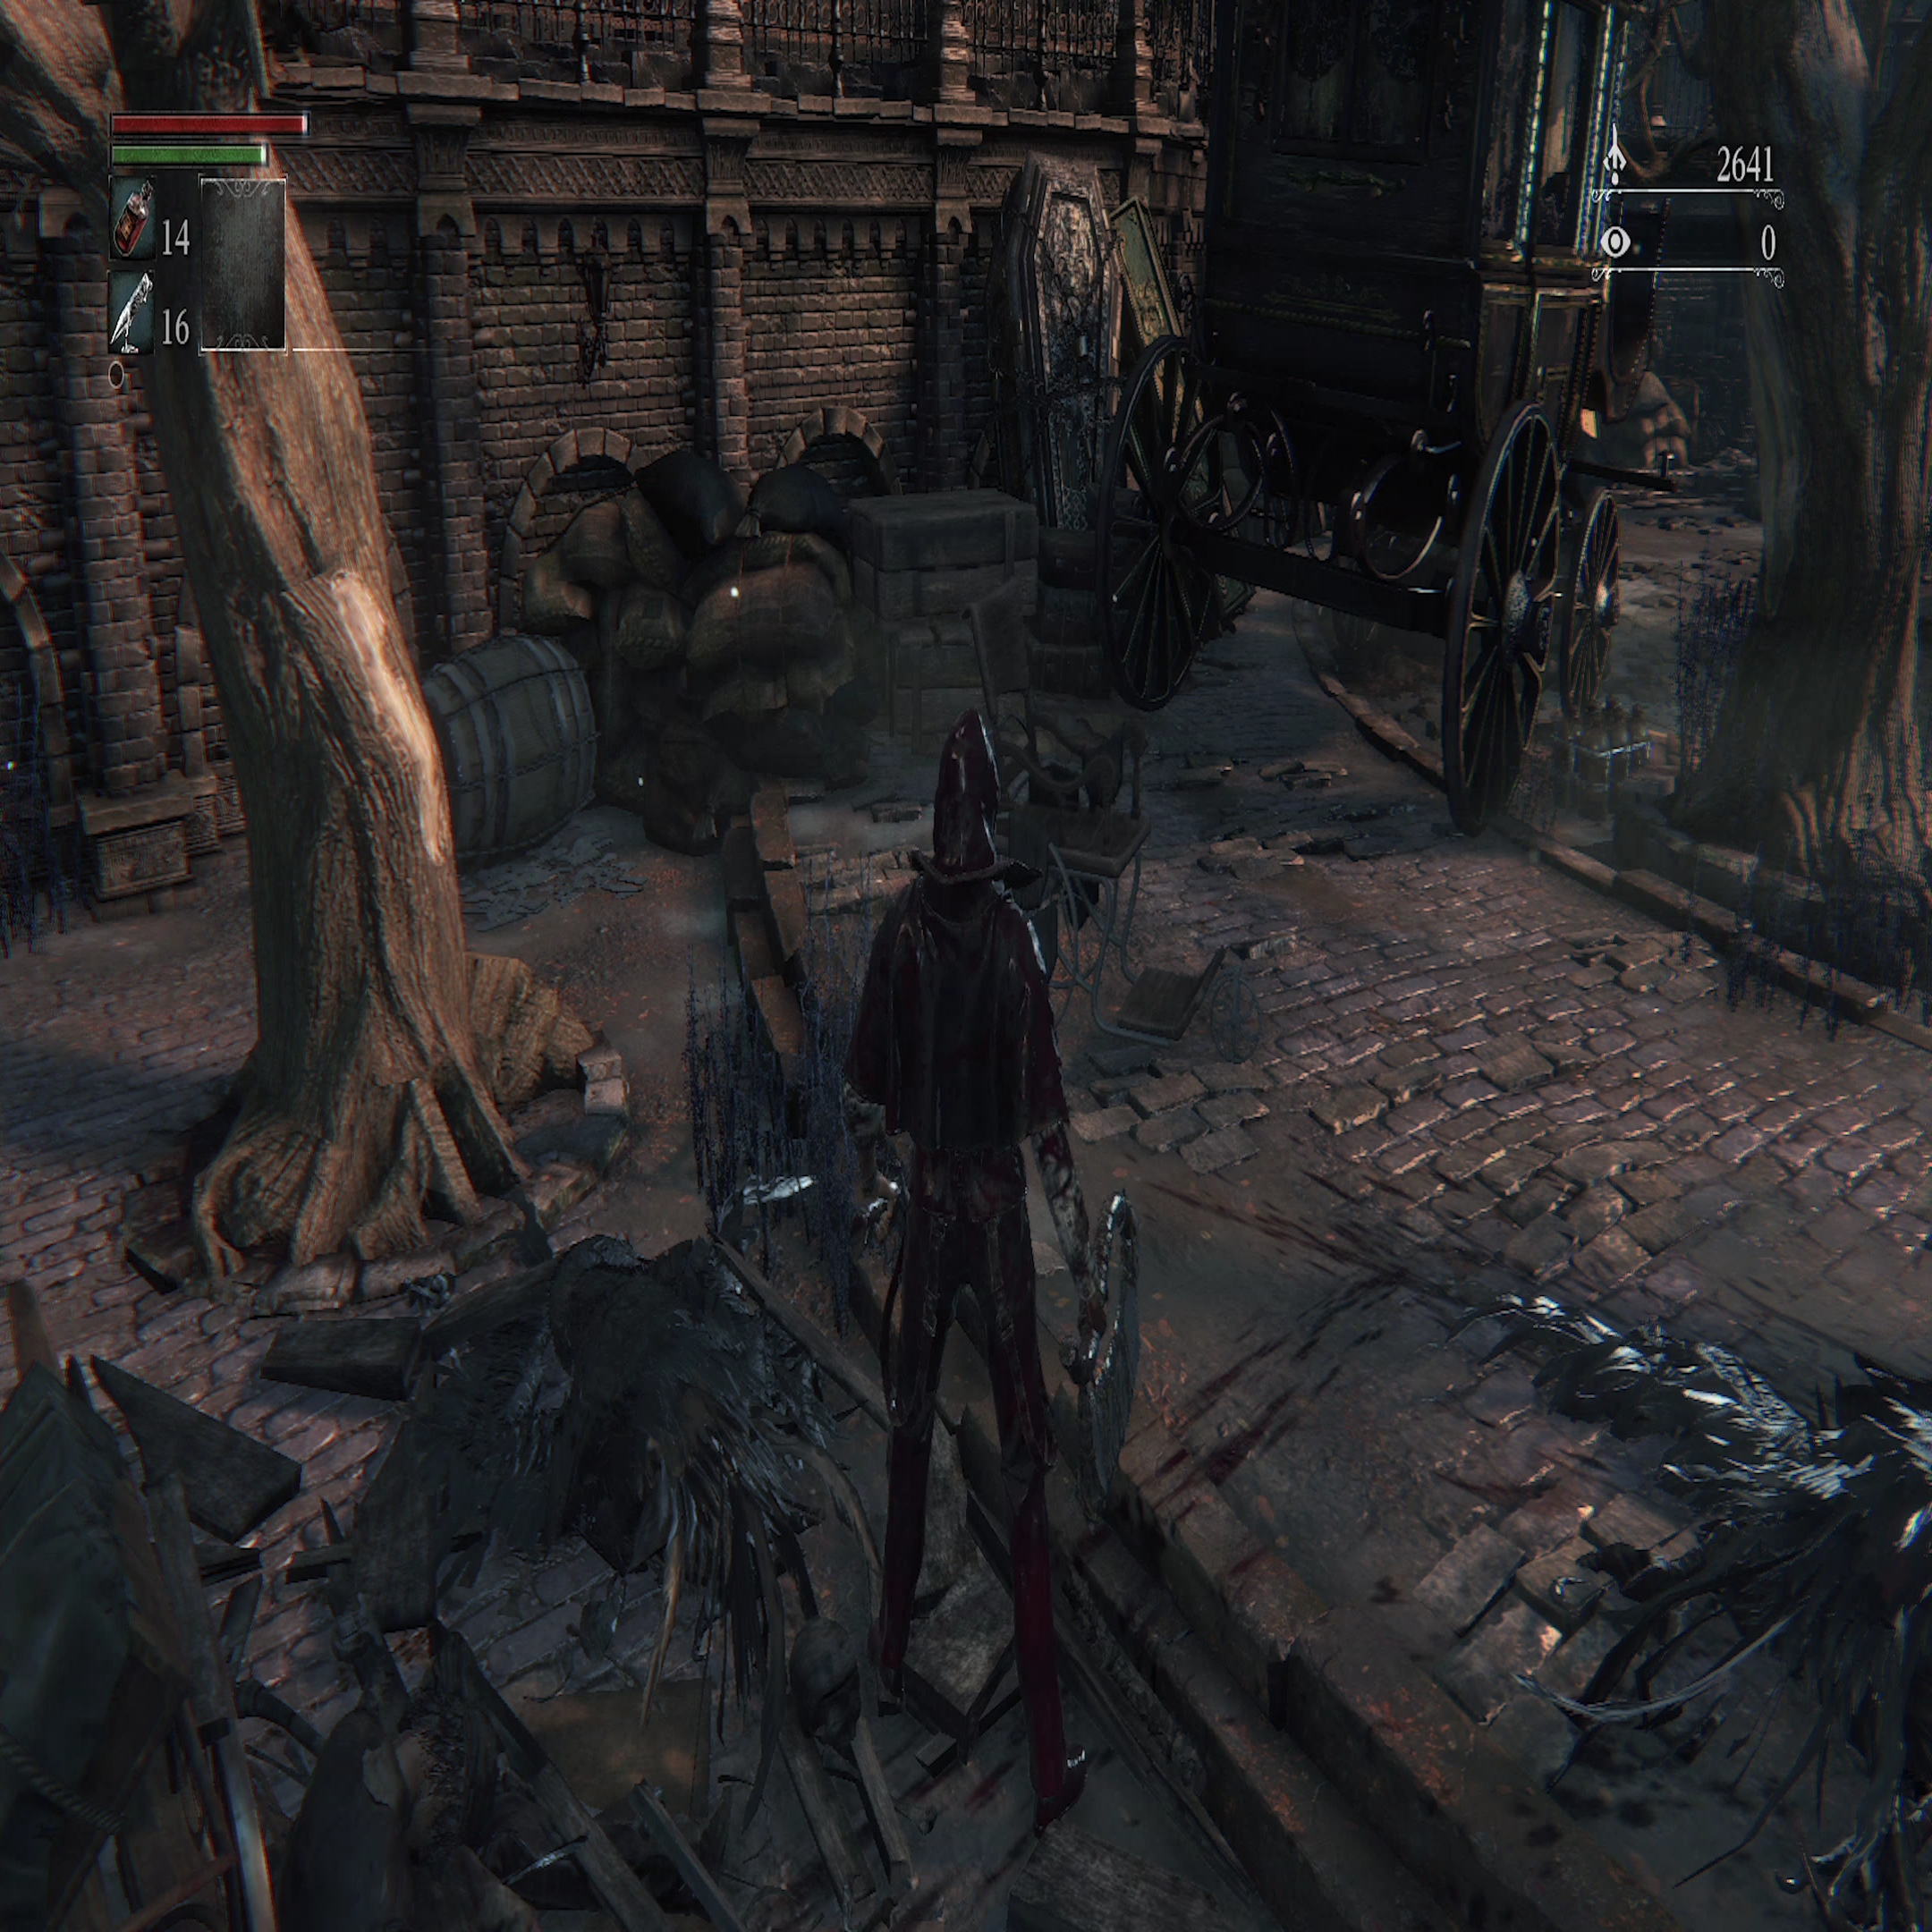 Behold! Bloodborne running at 1080p 60fps on a PS5